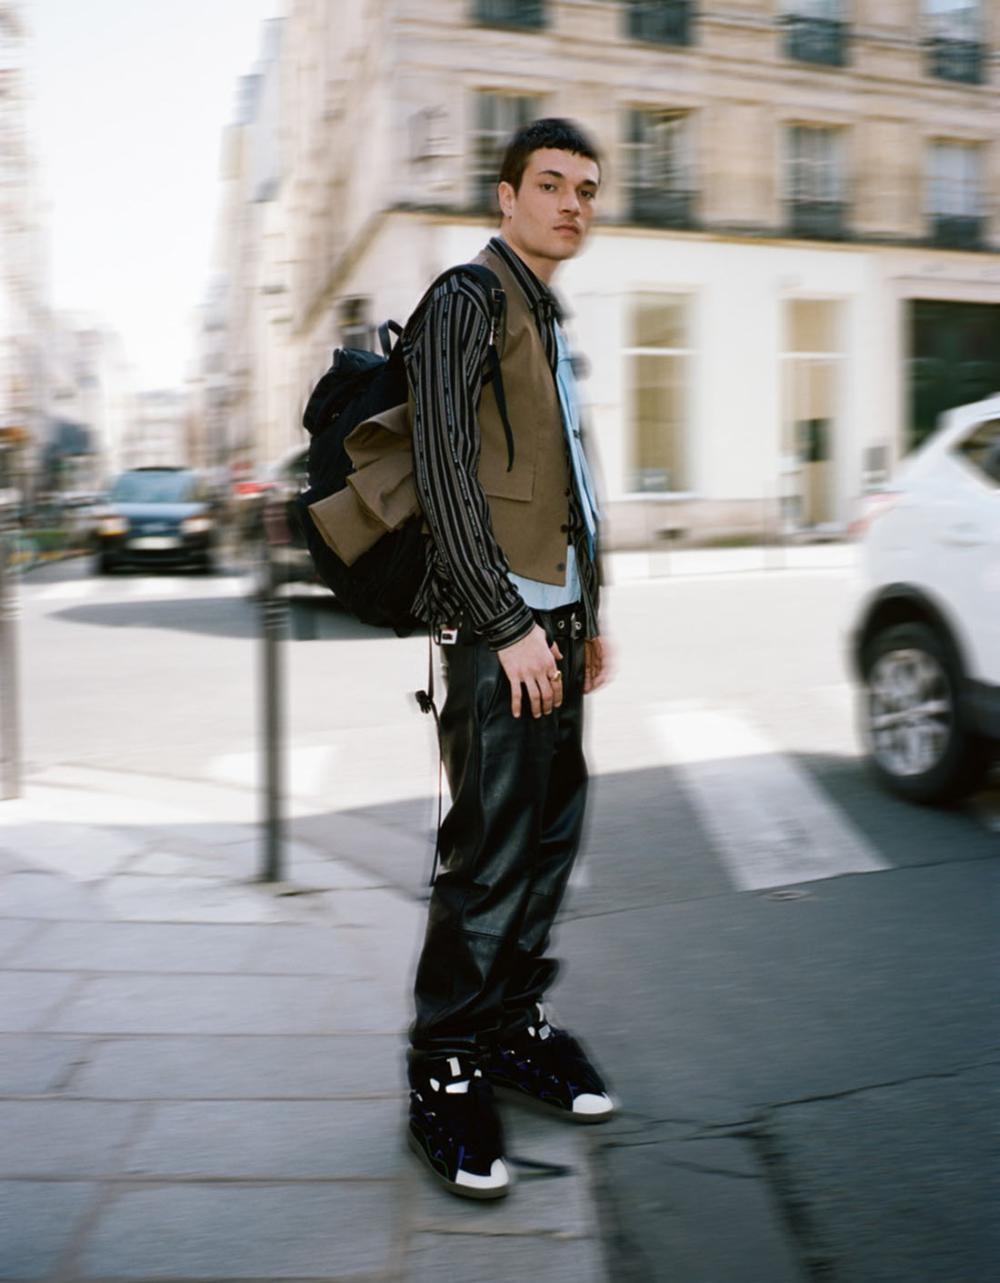 Clothing & Accessories: Jacket, Vest by Ermenegildo Zegna / Shirt by Dior / Pants by 032C / Underwear by Uniqlo / Sneakers by Lanvin / Prada Re-Nylon multi-pocket backpack / Tie by Charvet / Luka Isaac by Pierre-Ange Carlotti for Vogue Ukraine Man Spring-Summer 2021